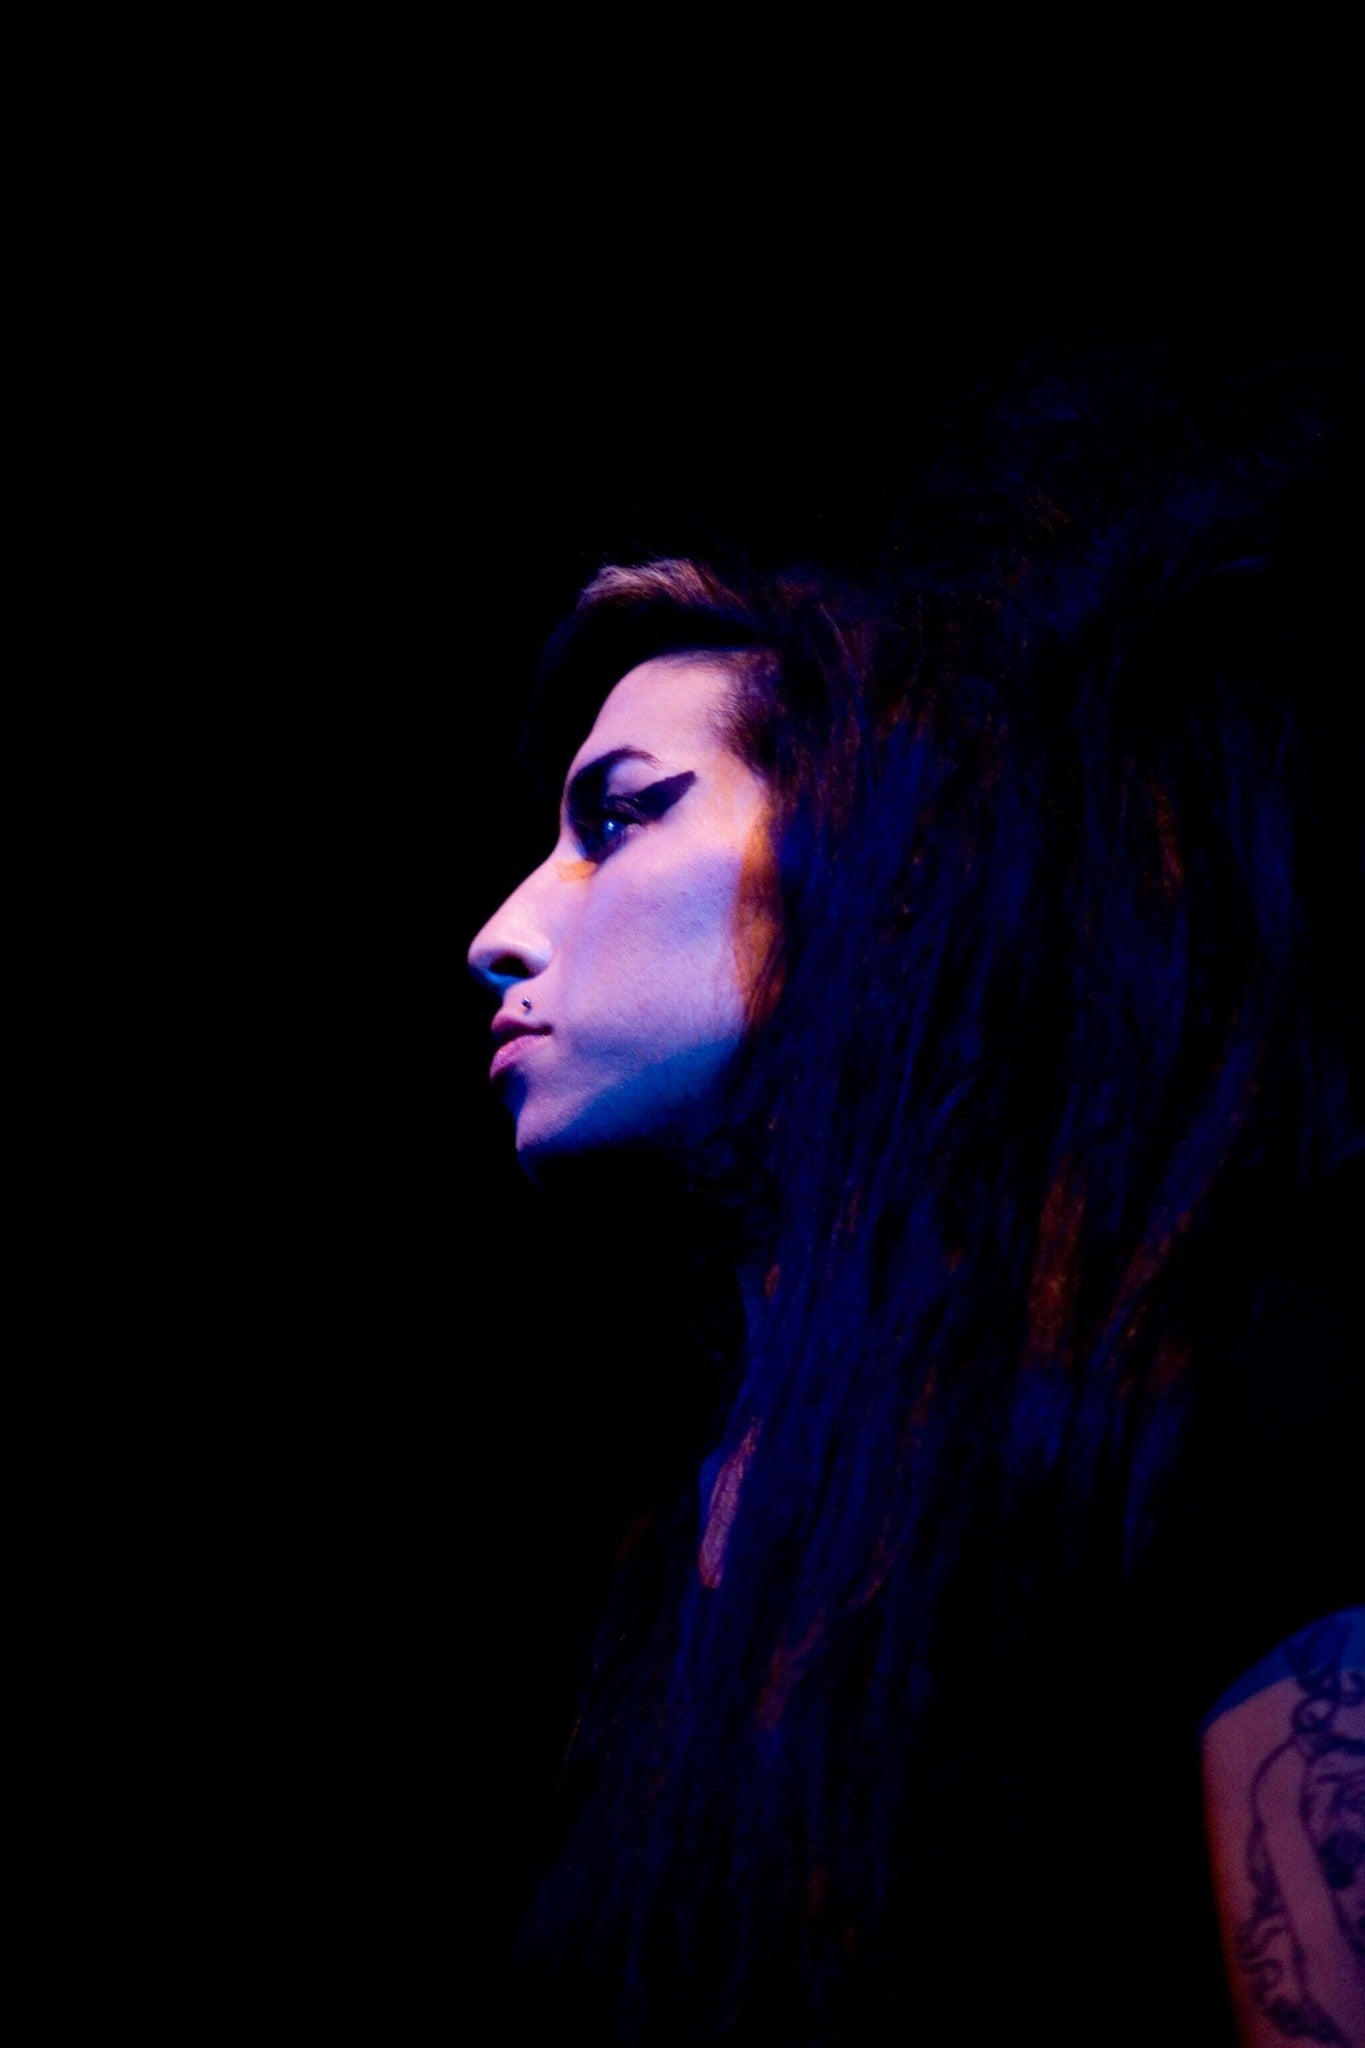 Amy Winehouse - A Profile Portrait Against a Dark Backdrop, 2007 Poster (1/2)